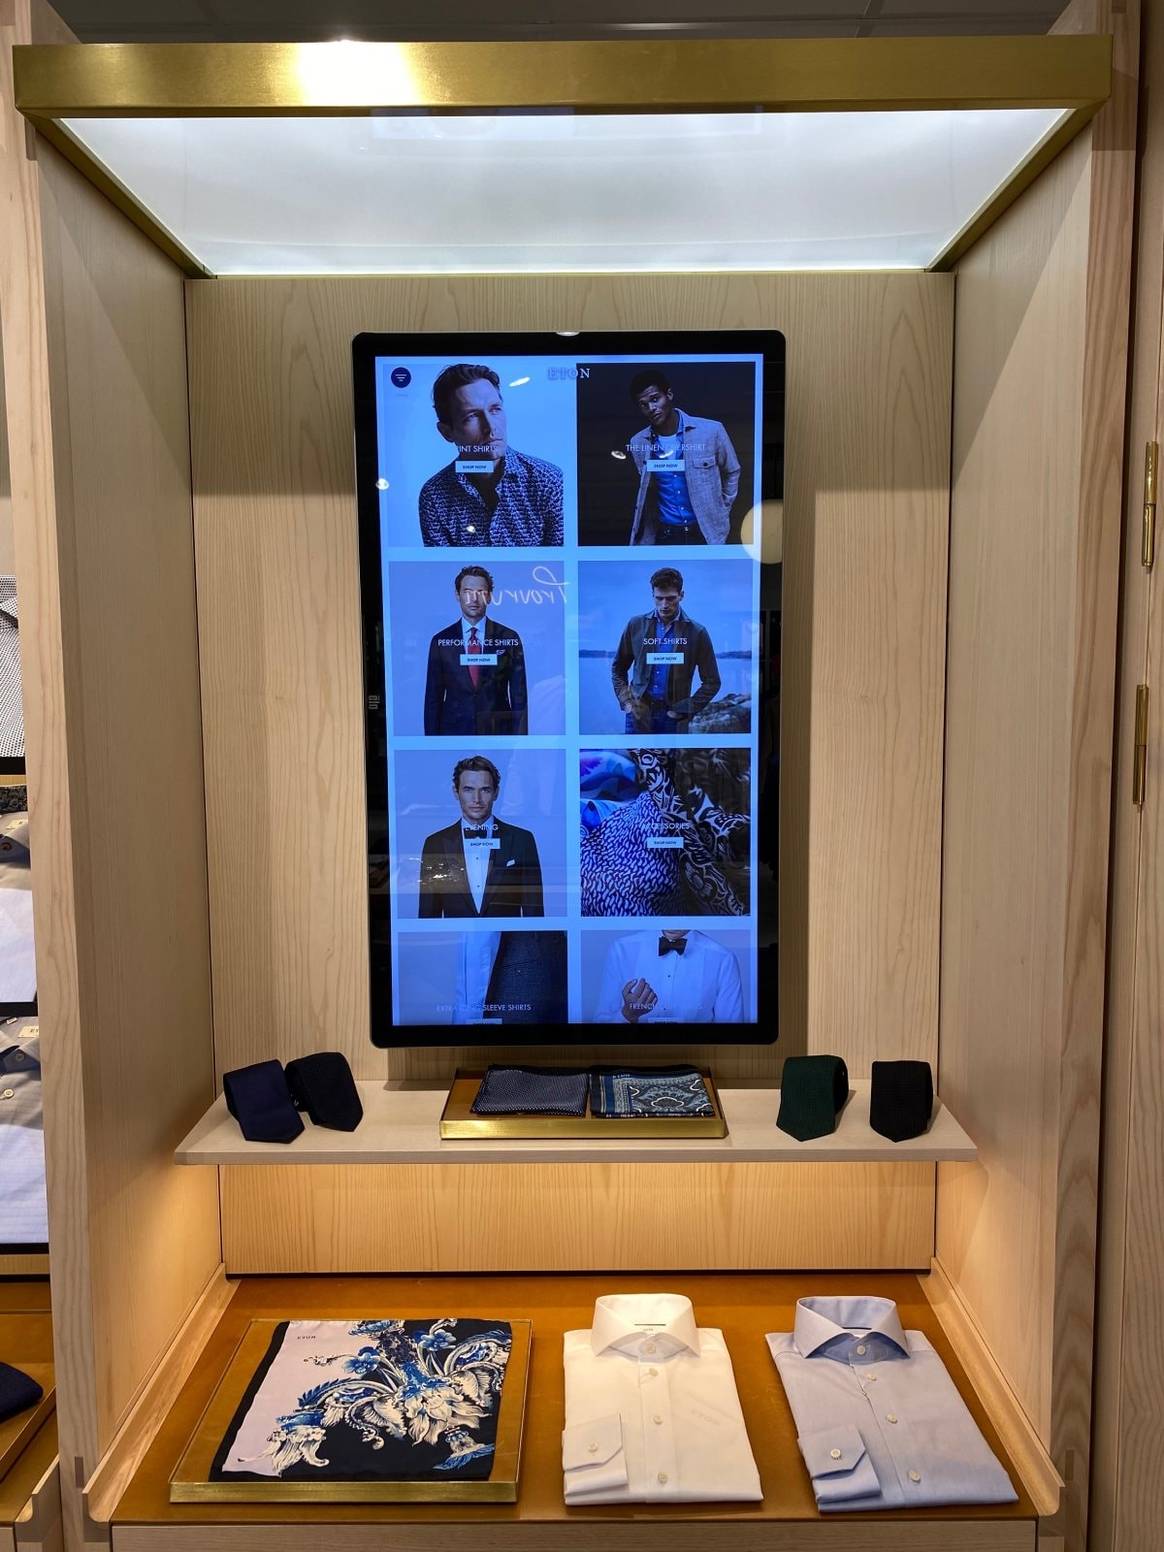 Shirt specialist Eton takes the next step in its omnichannel journey - launching endless aisle in retail partner stores